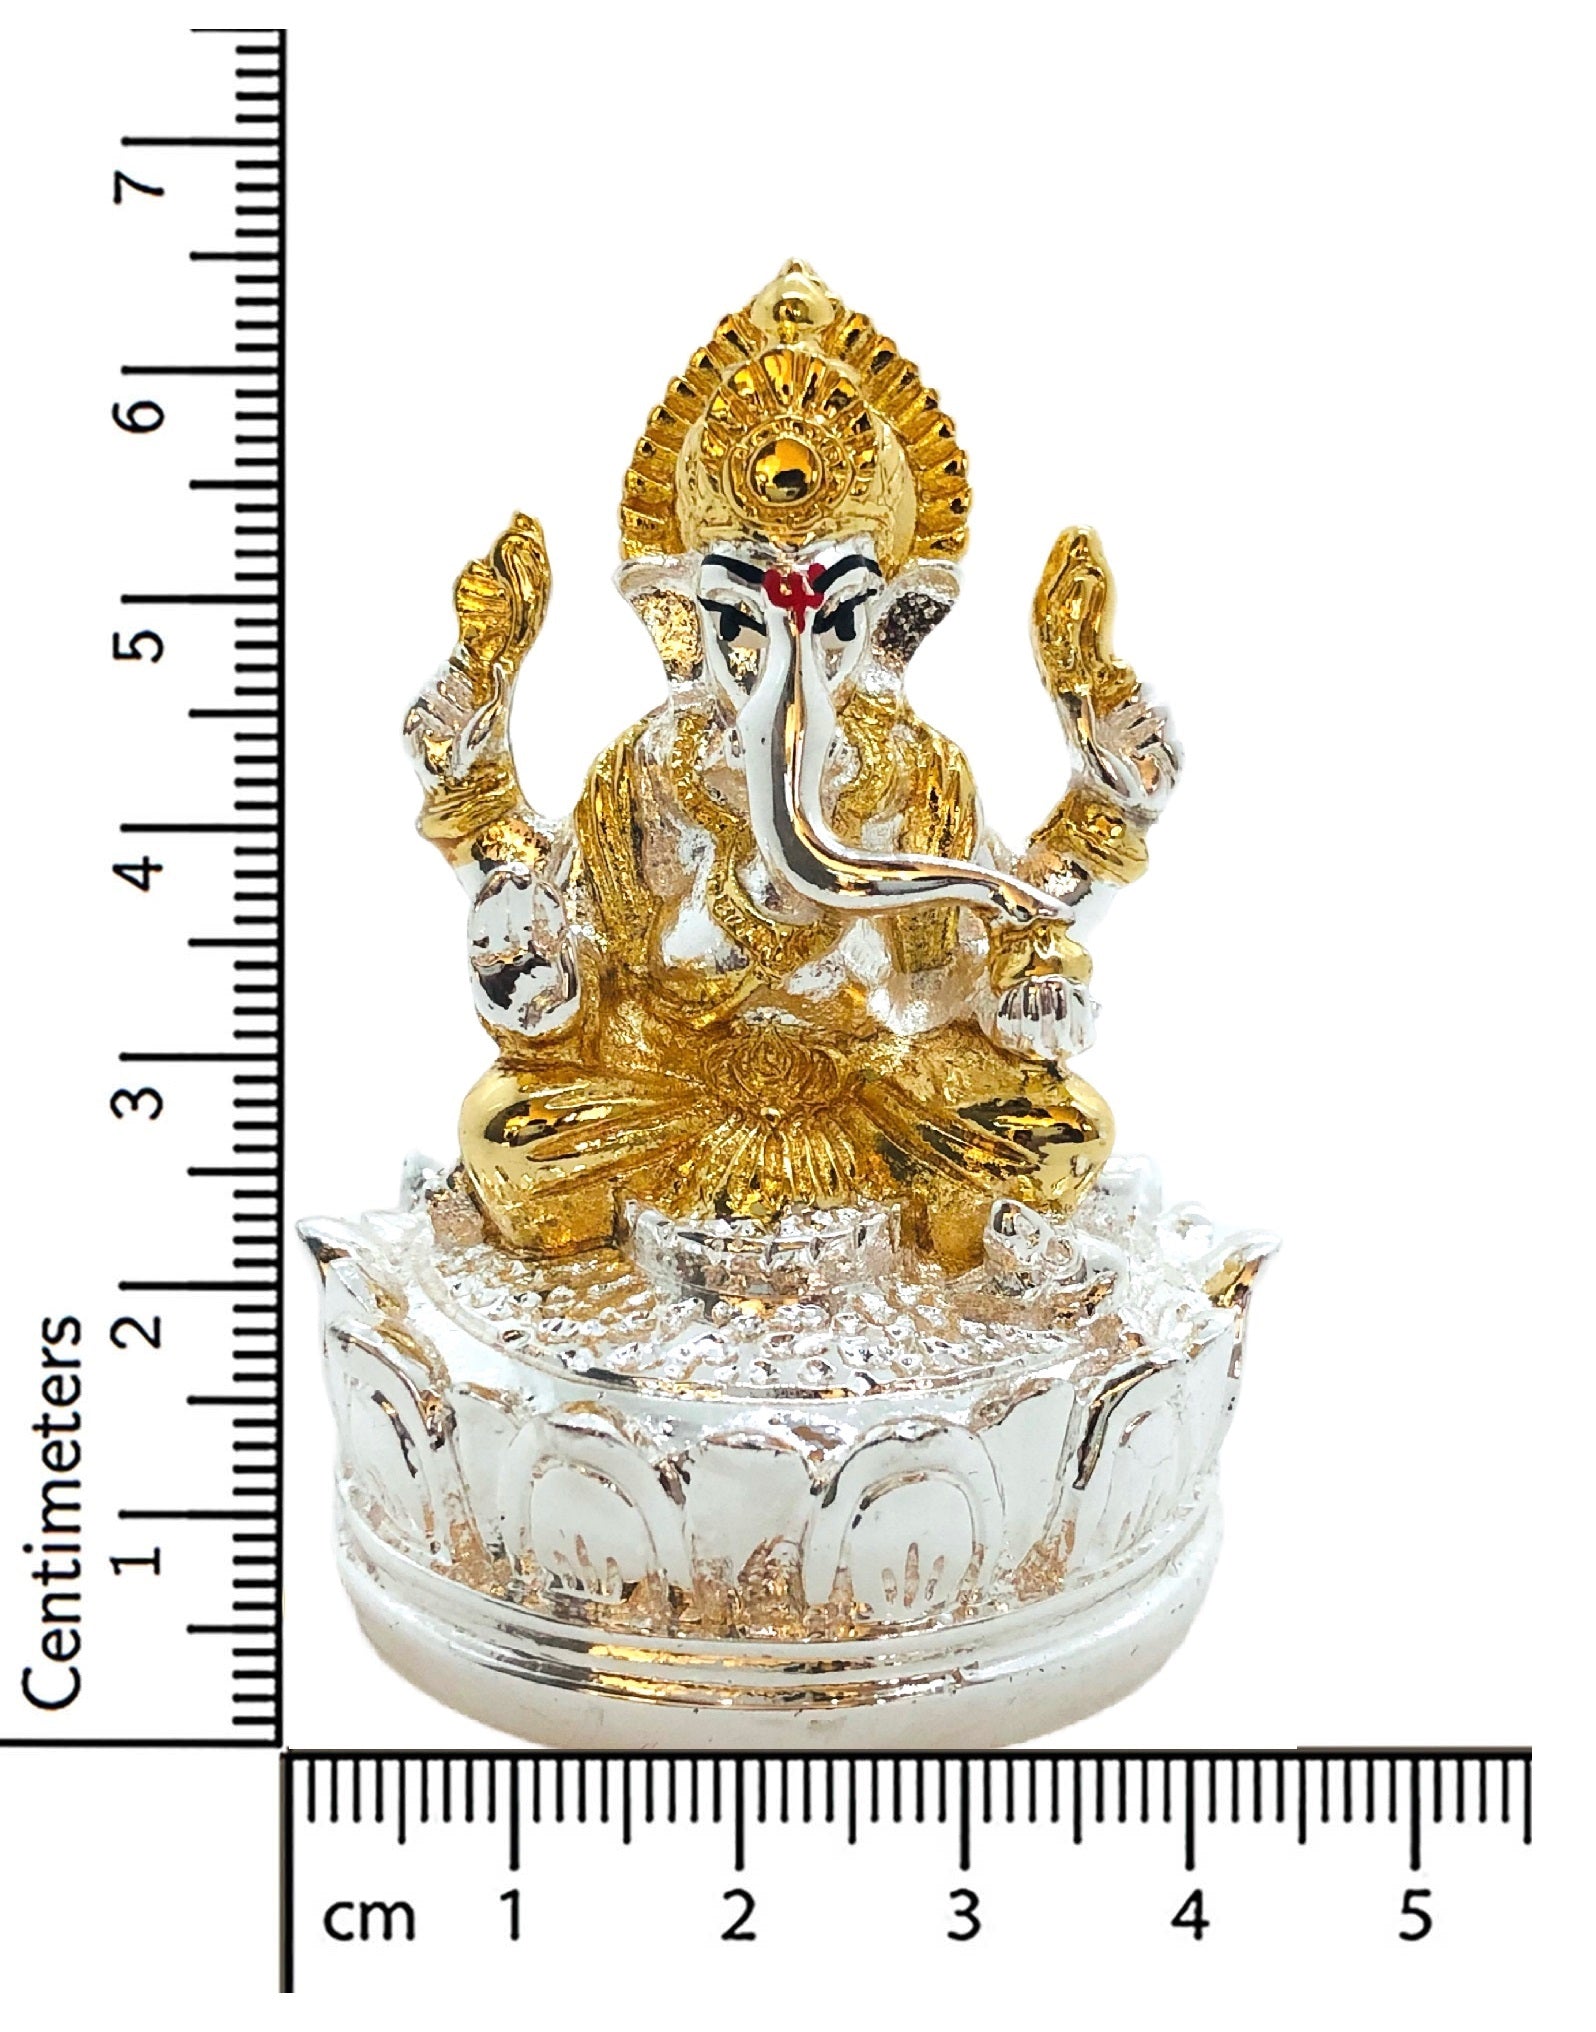 Silver & Gold Plated Shree Ganesh Idol / Murti for Puja Room, Temple, Meditation, Office, Business & Home Decoration Gift Collection